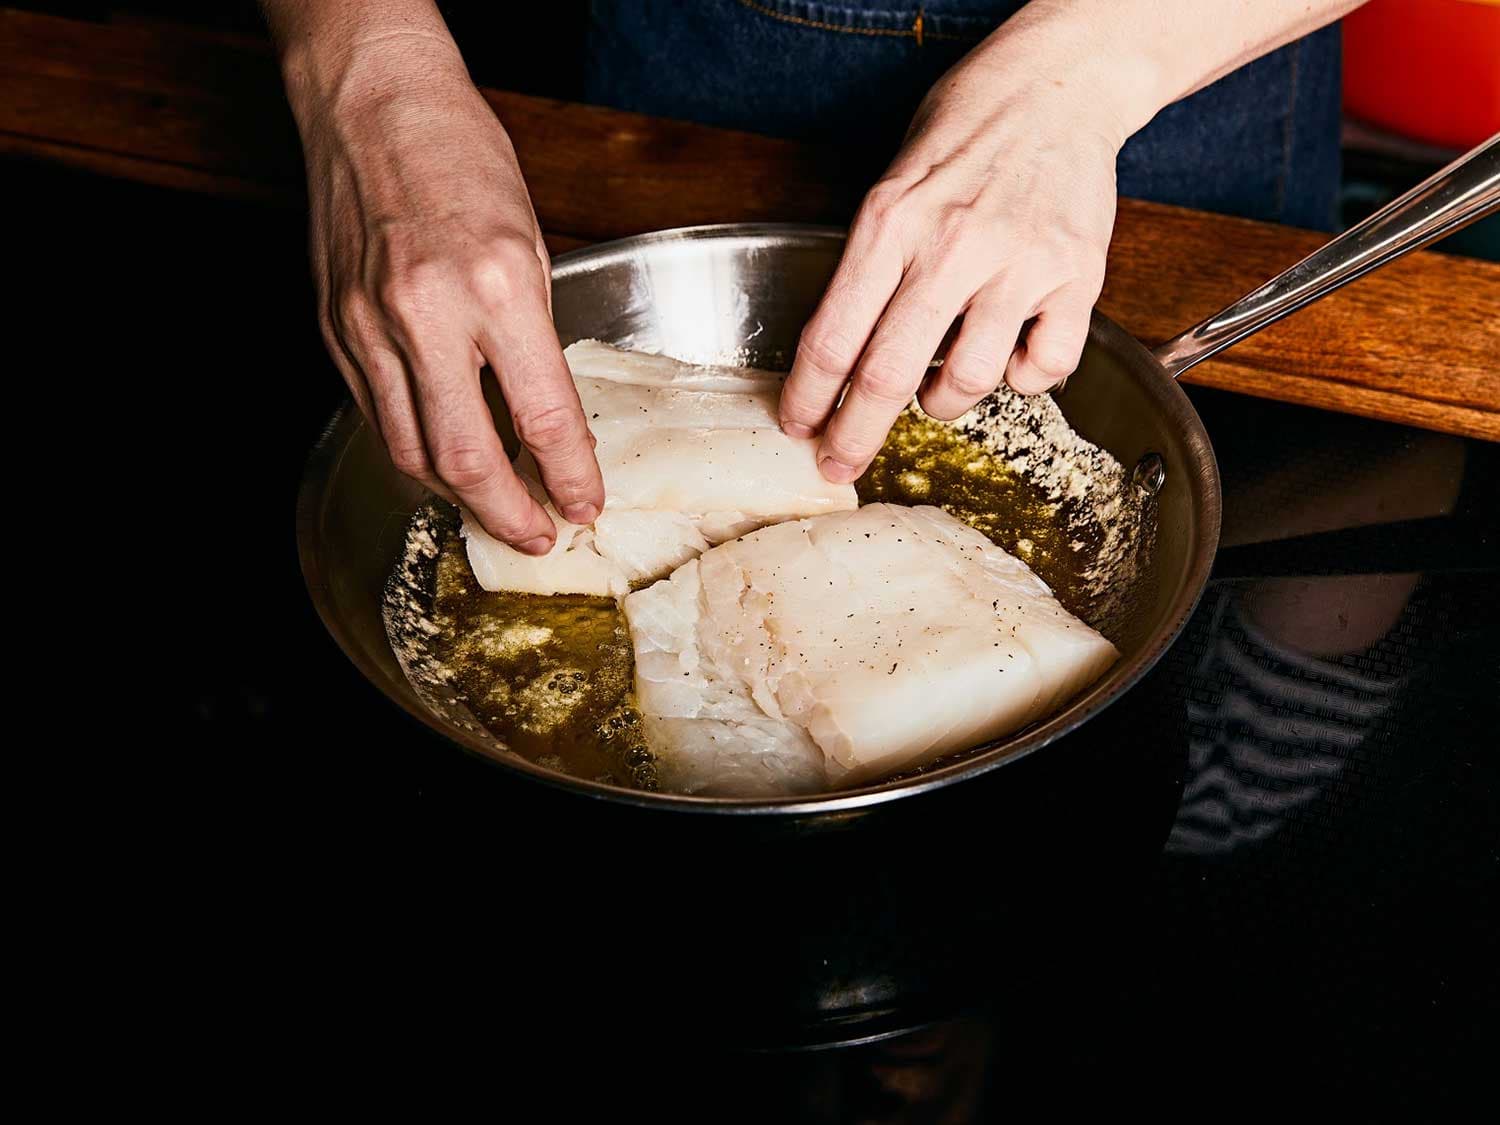 Lightly sear the cod on both sides in a mixture of olive oil and butter.